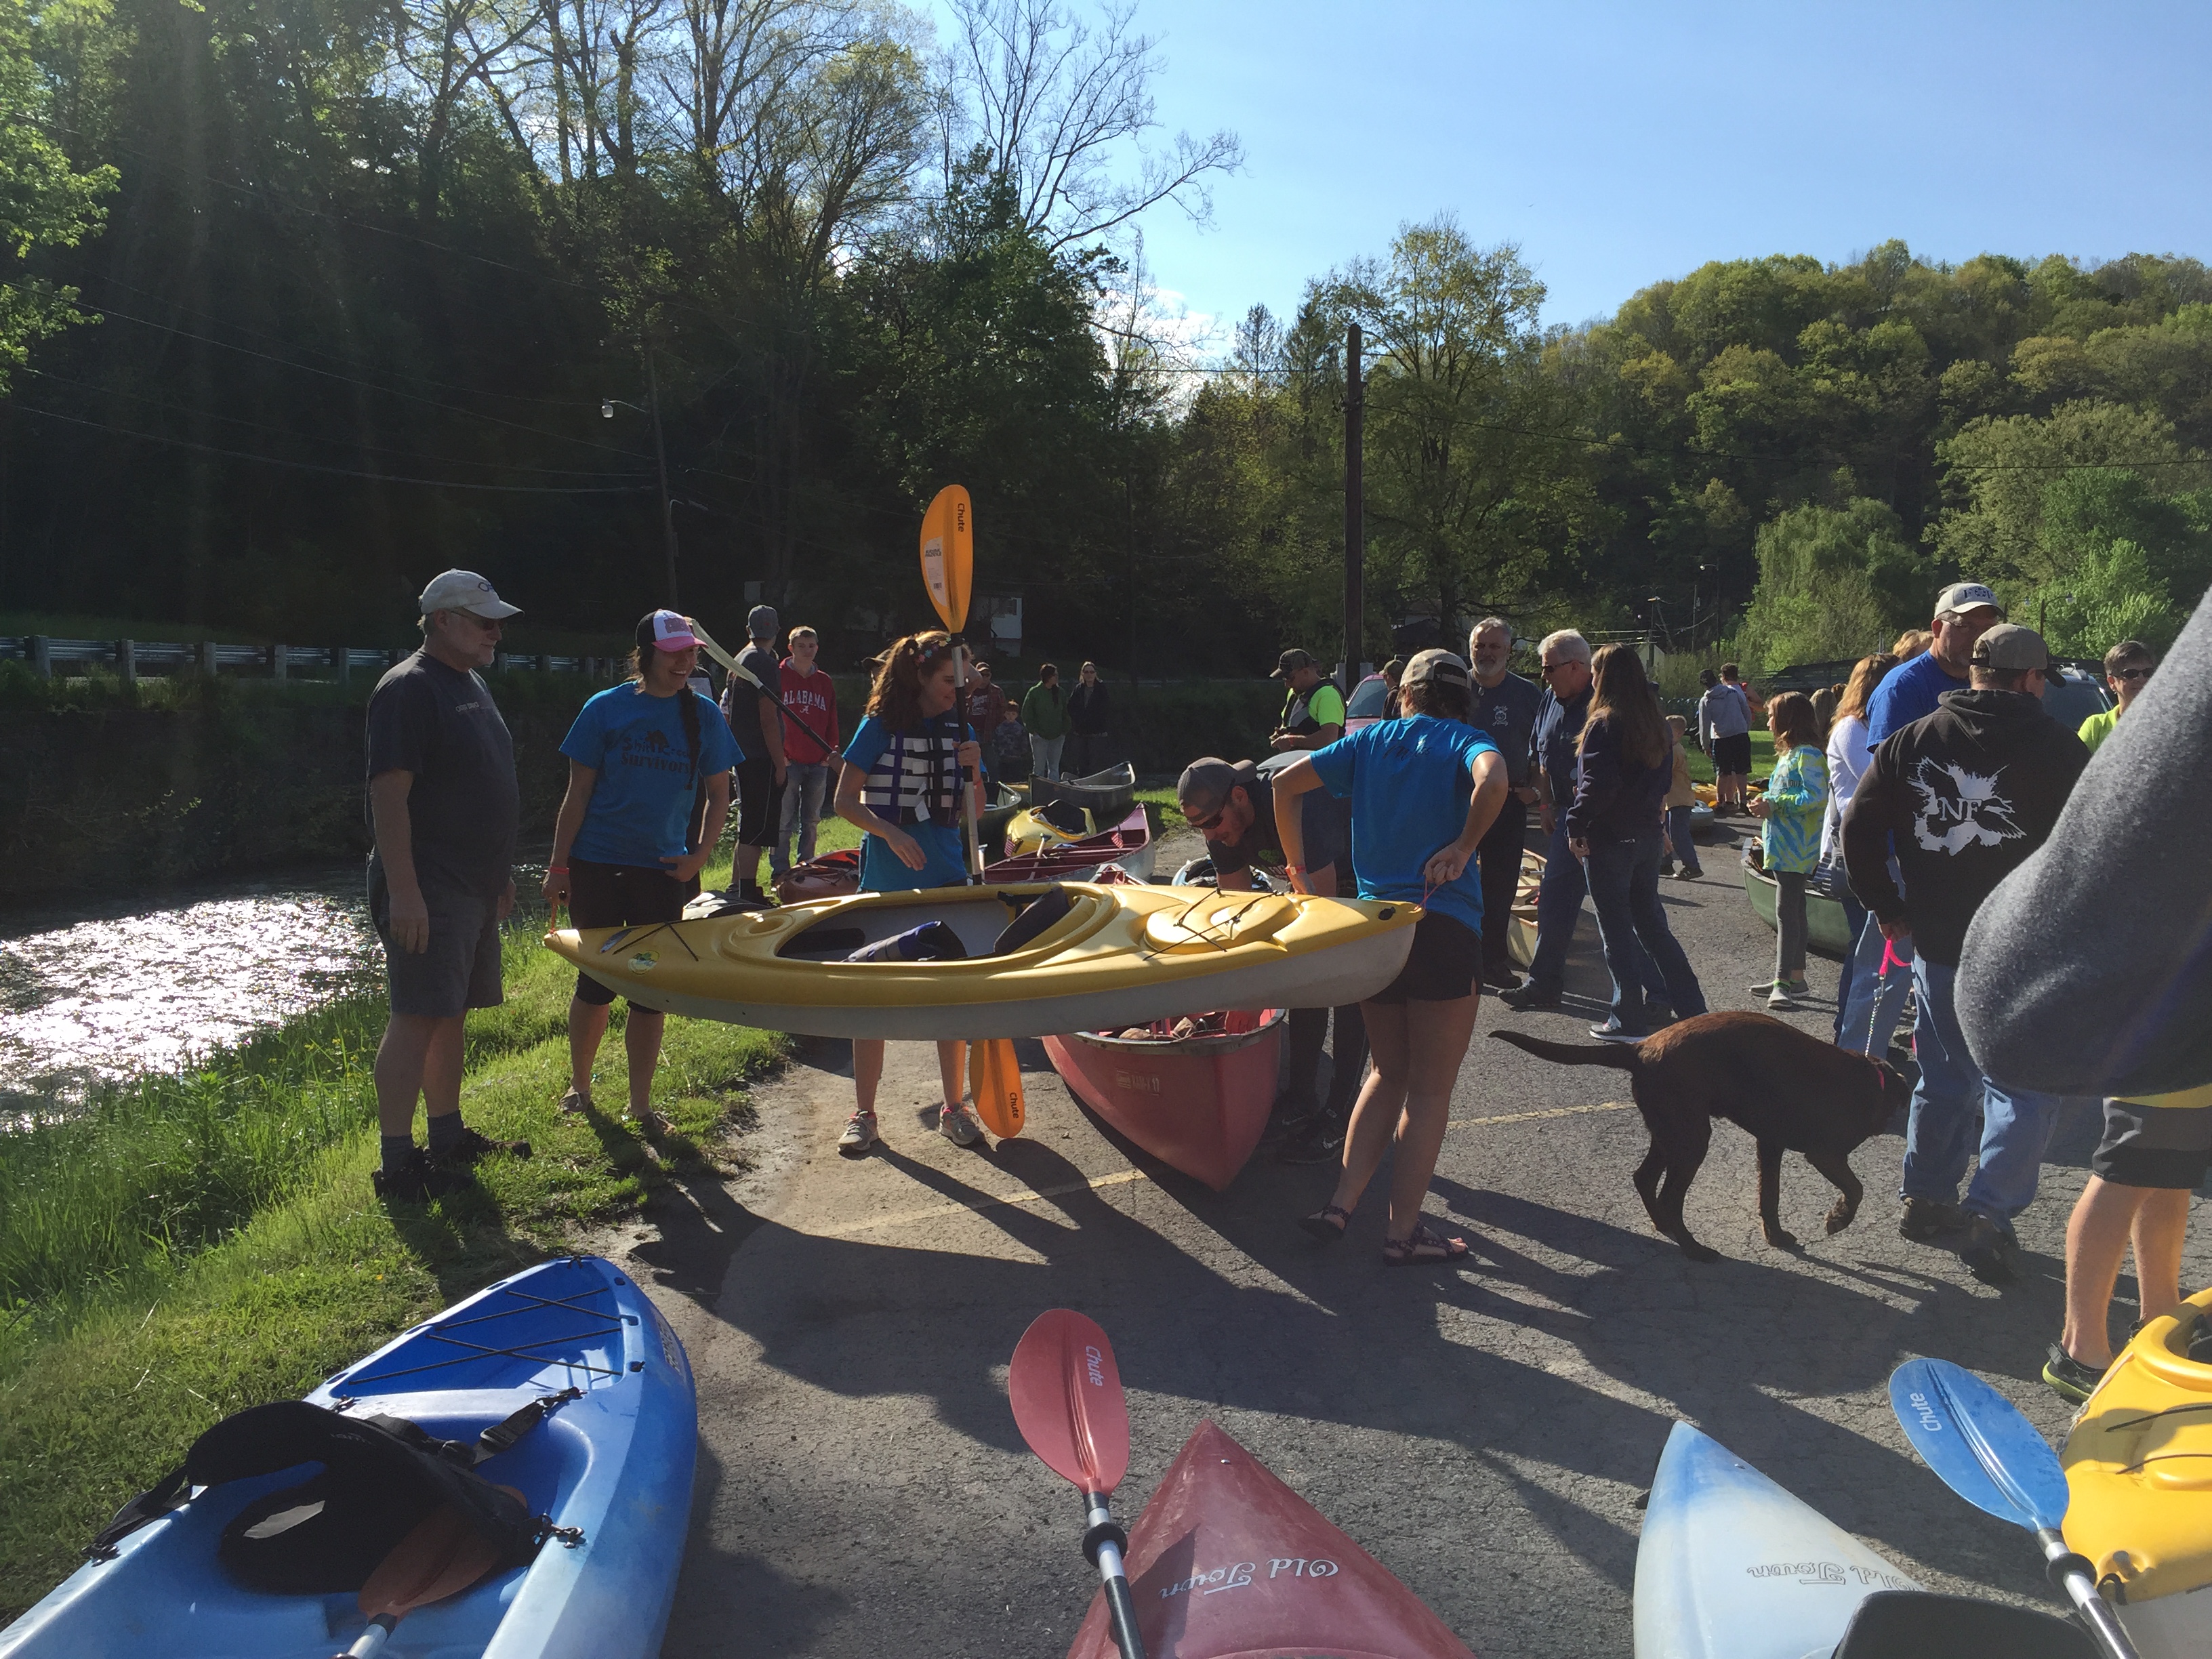 people holding canoes, kayaks and paddles getting ready for a race